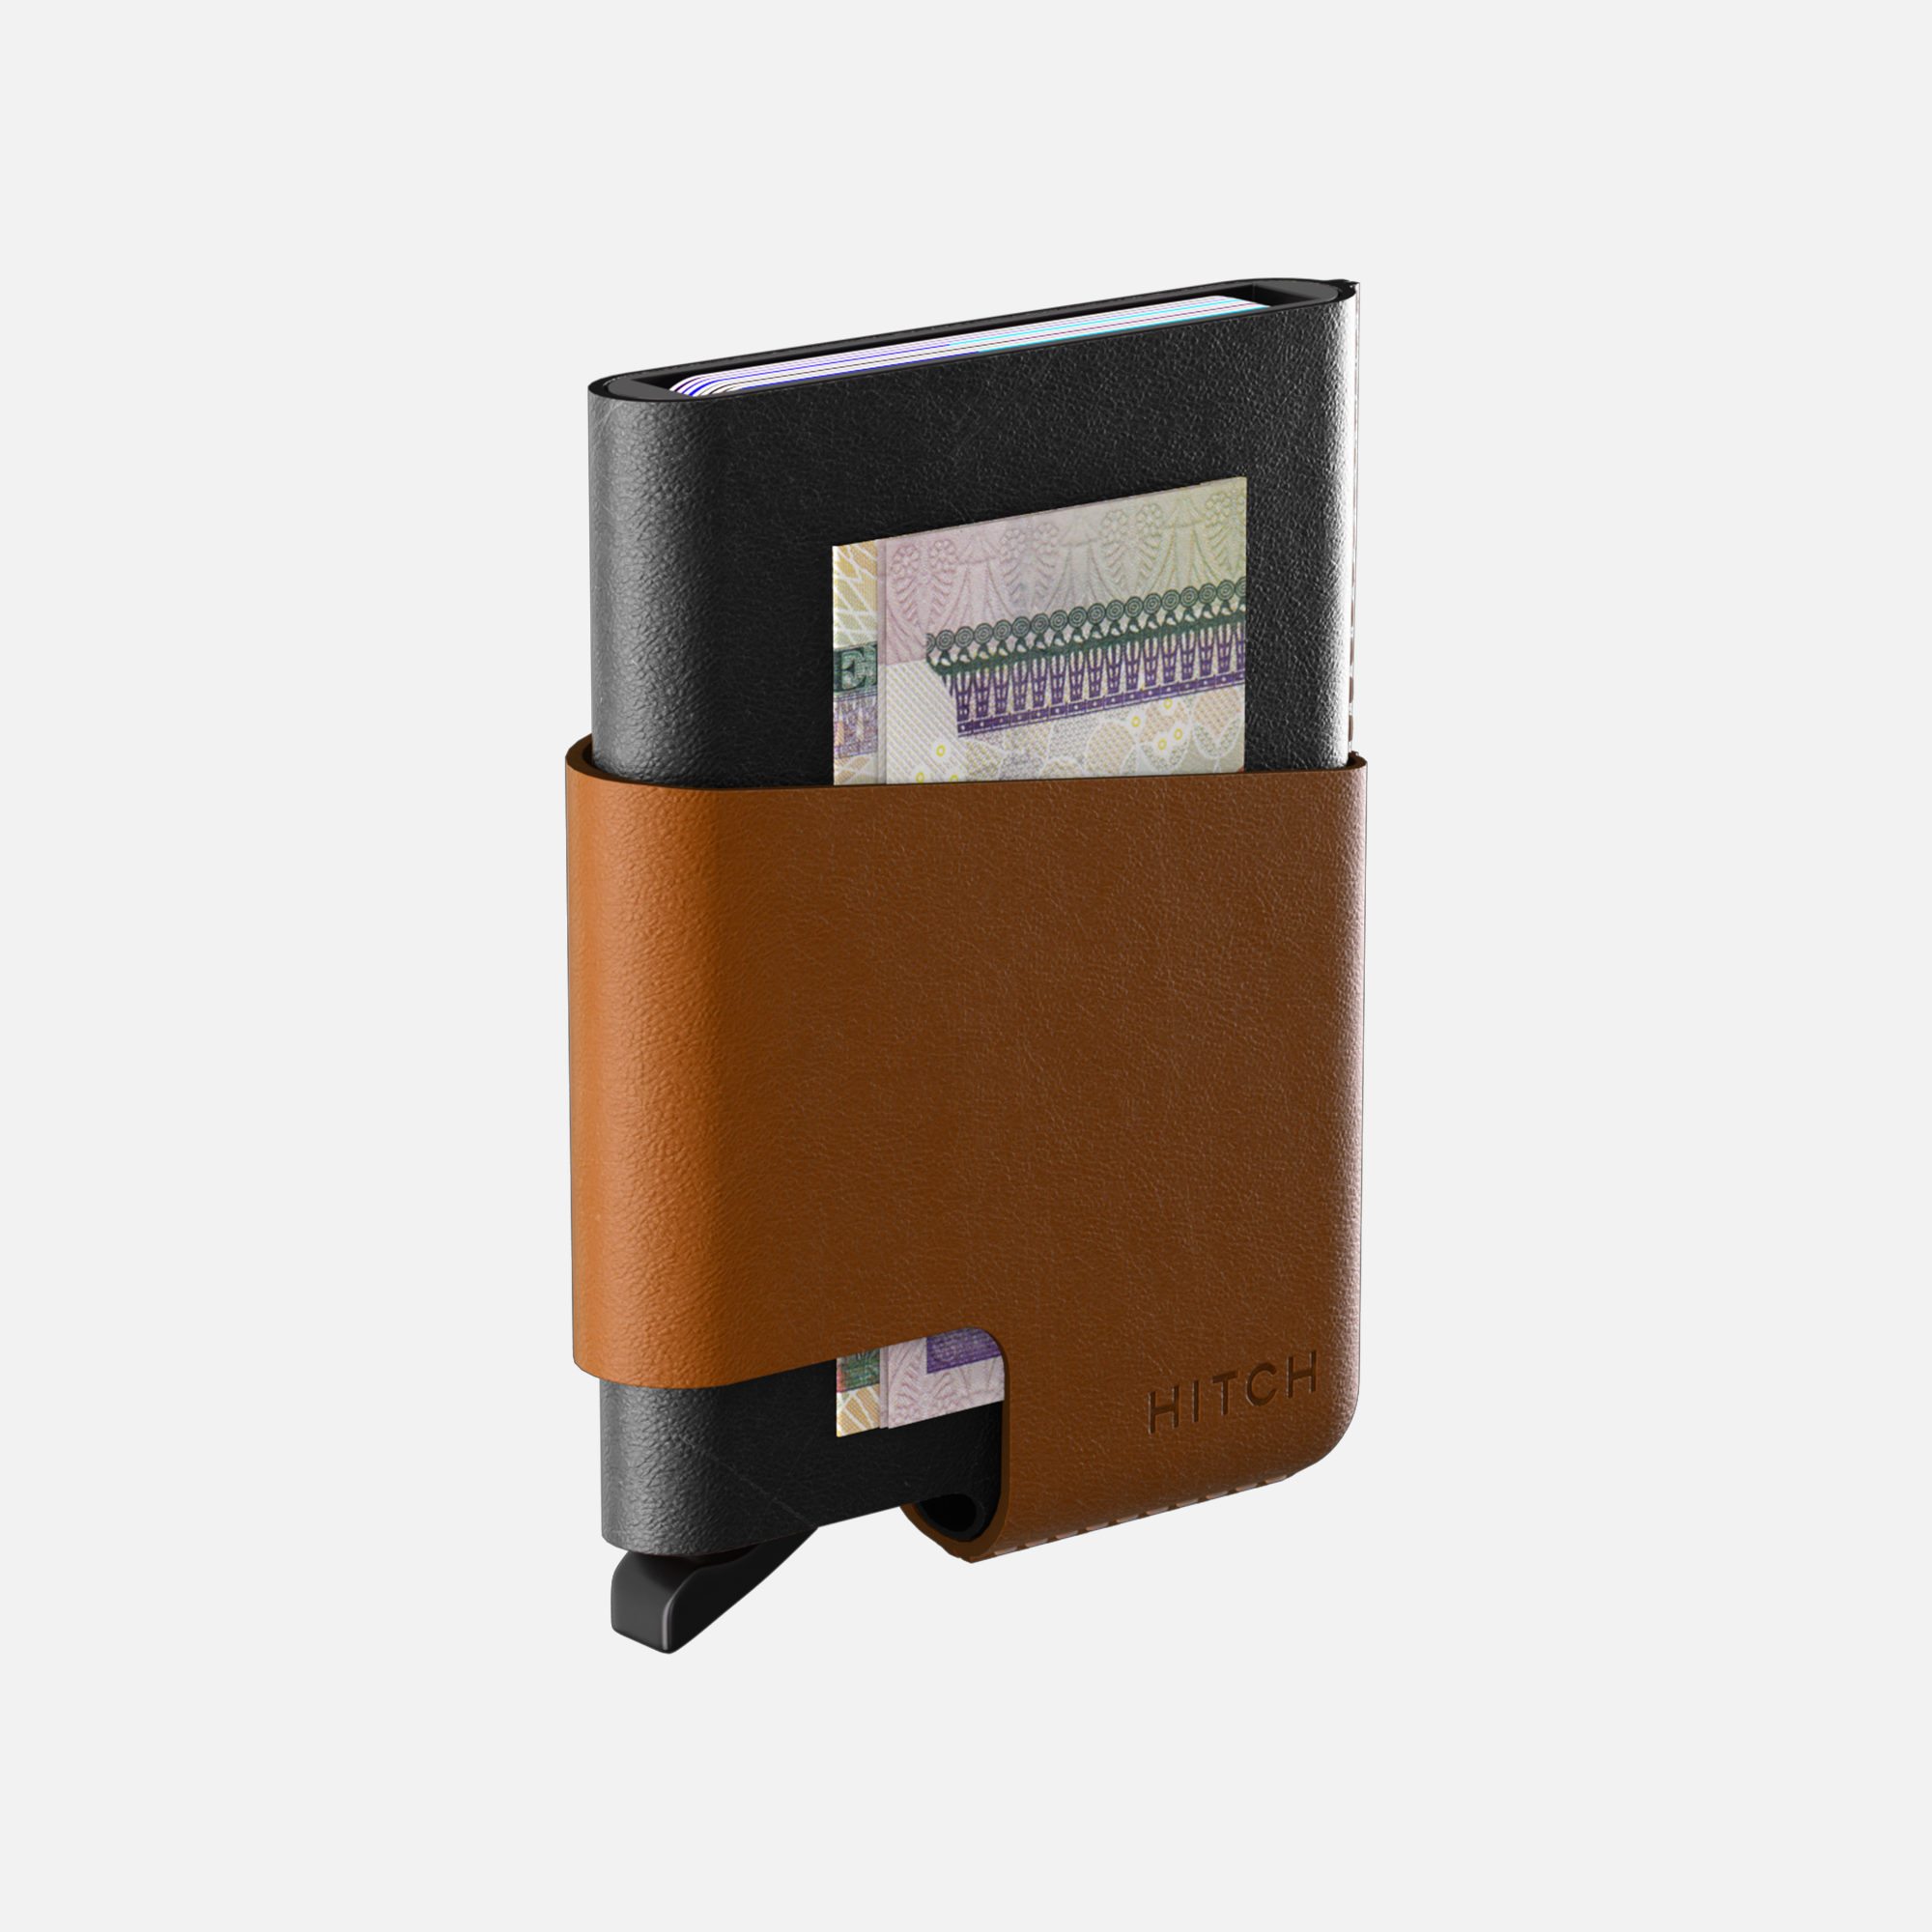 Black and brown leather wallet with money clip and cash on white background.